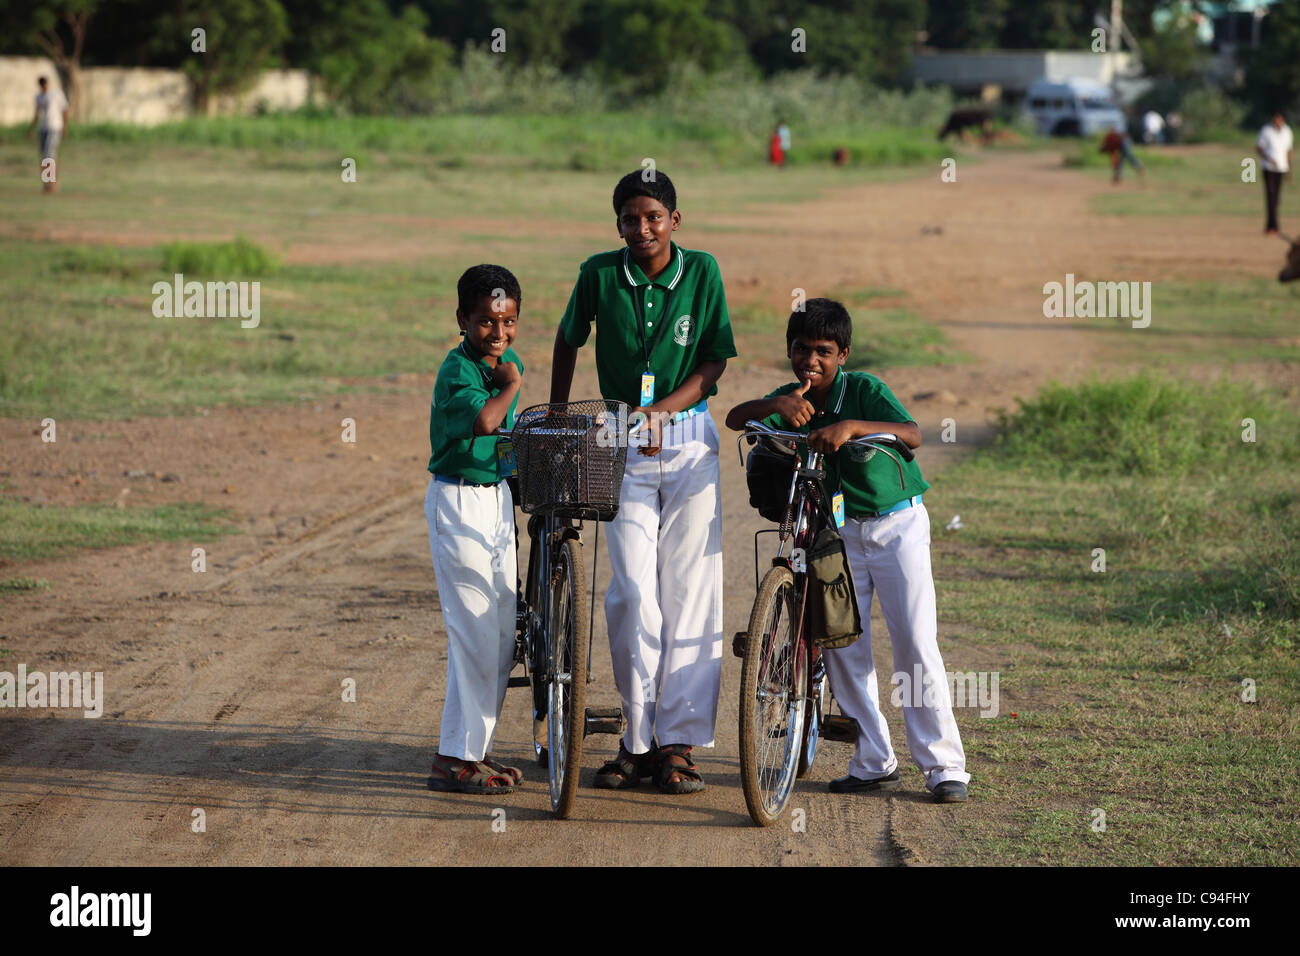 Indian school boys with bicycle Tamil Nadu India Stock Photo